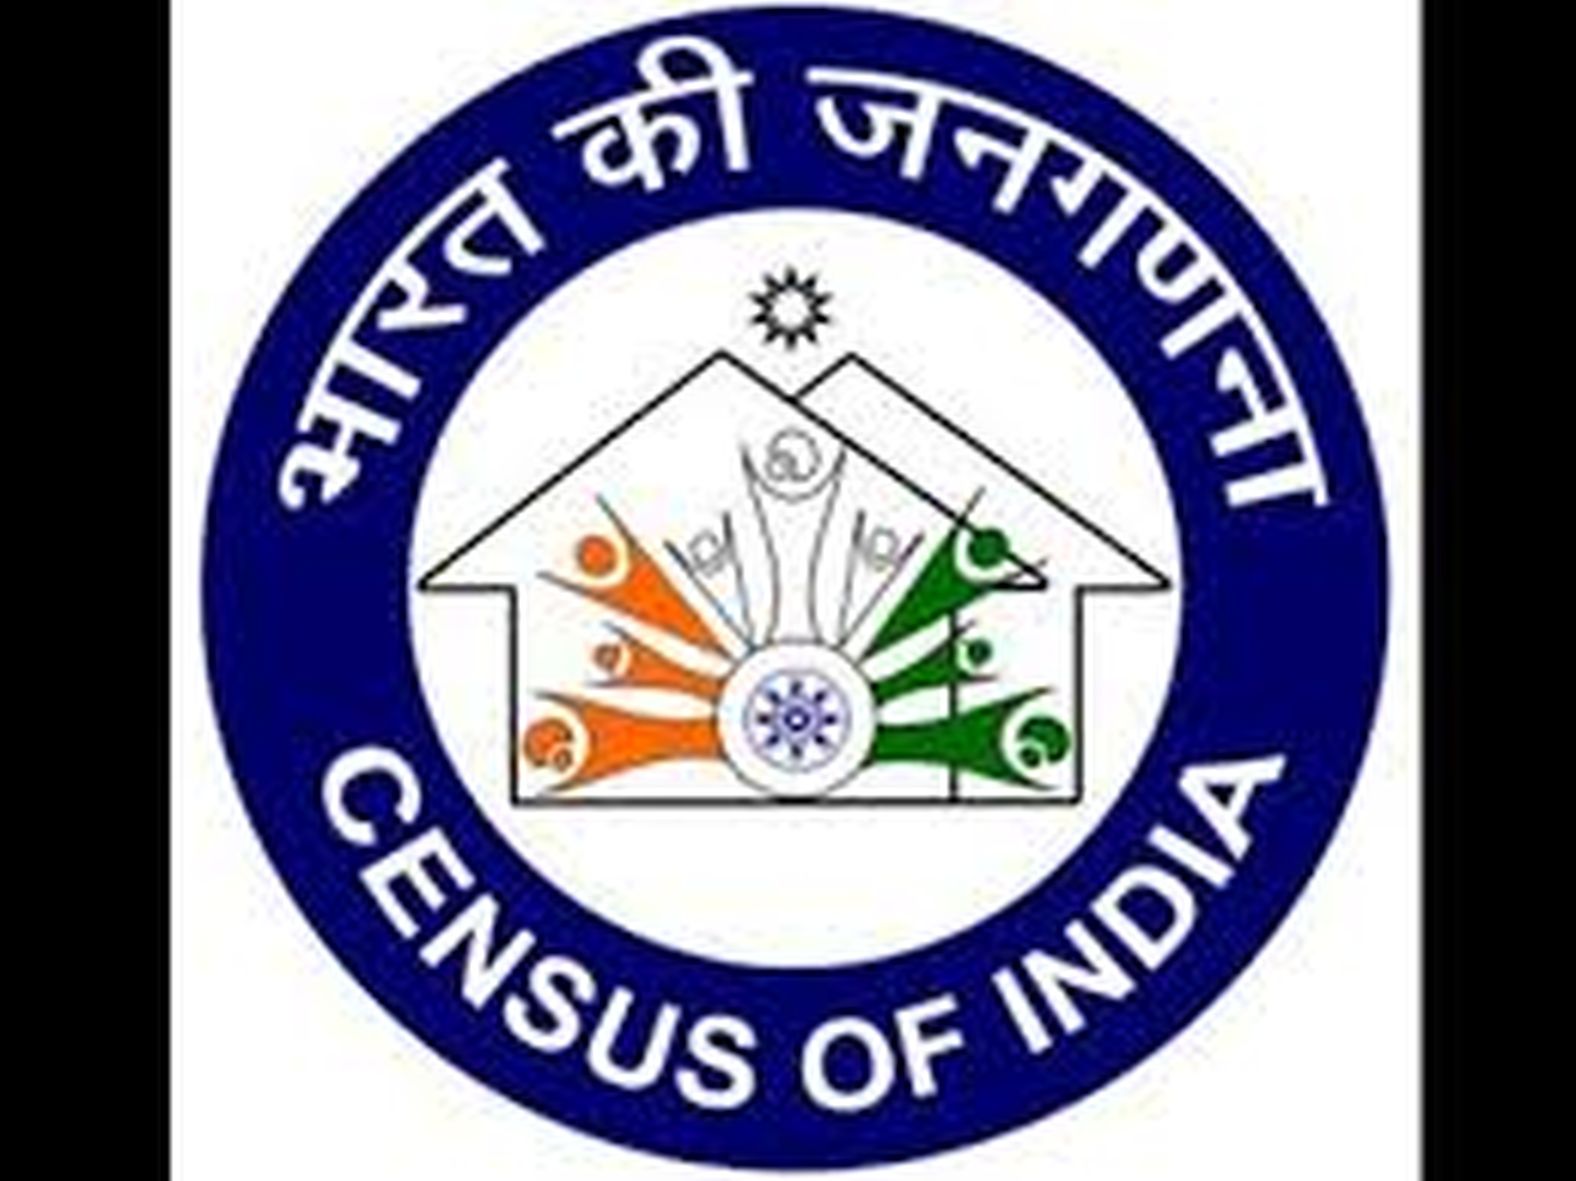 Census: First house listing will ask for information on 31 points